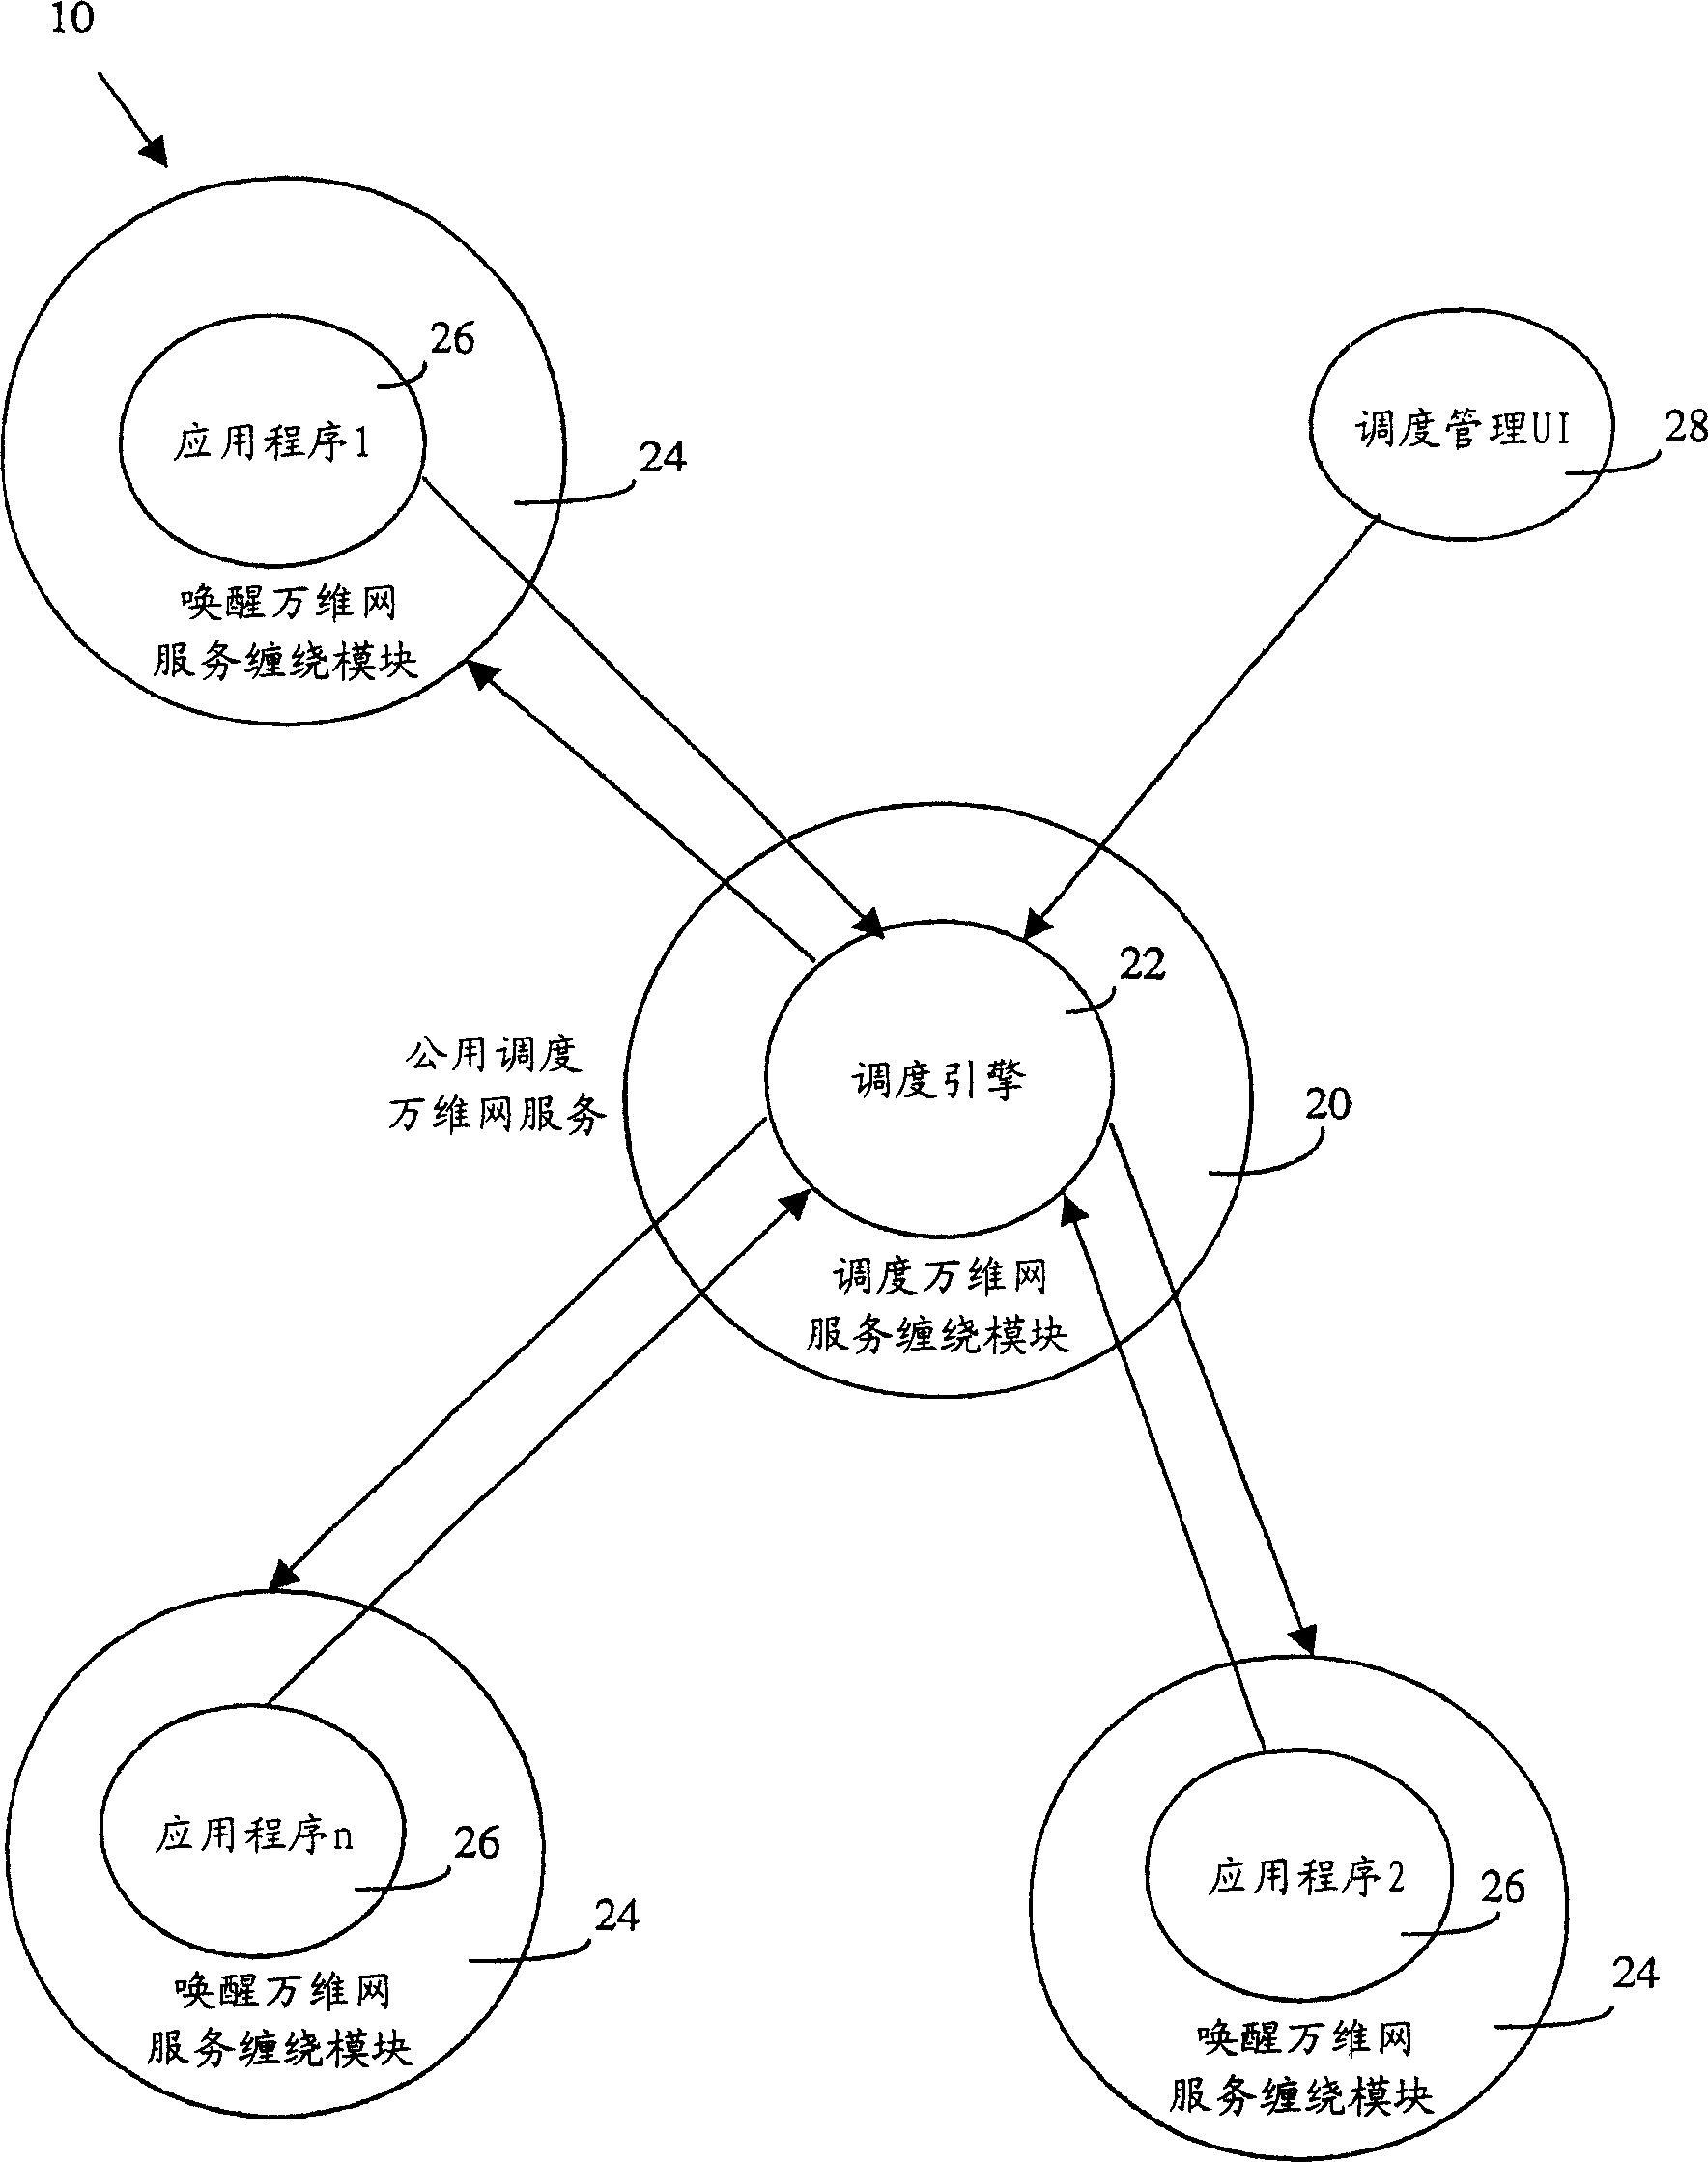 A common scheduler web service for distributed network environments